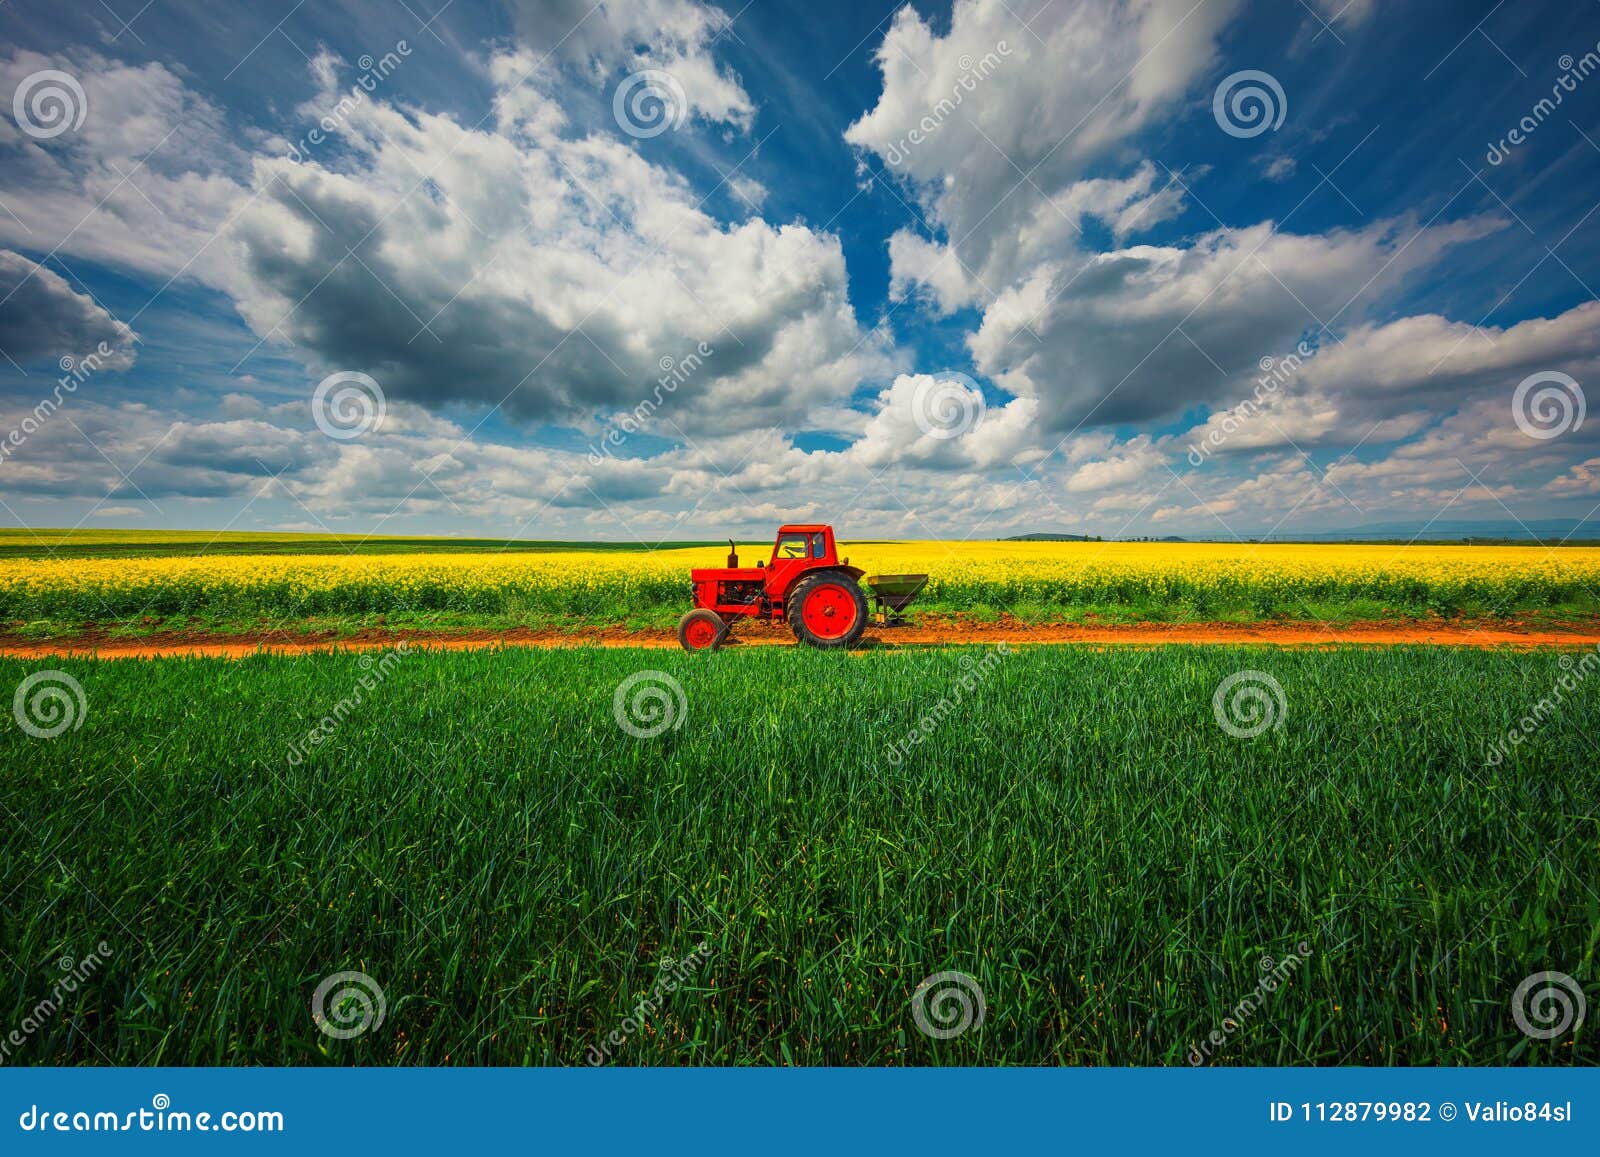 tractor in the agricultural fields and dramatic clouds